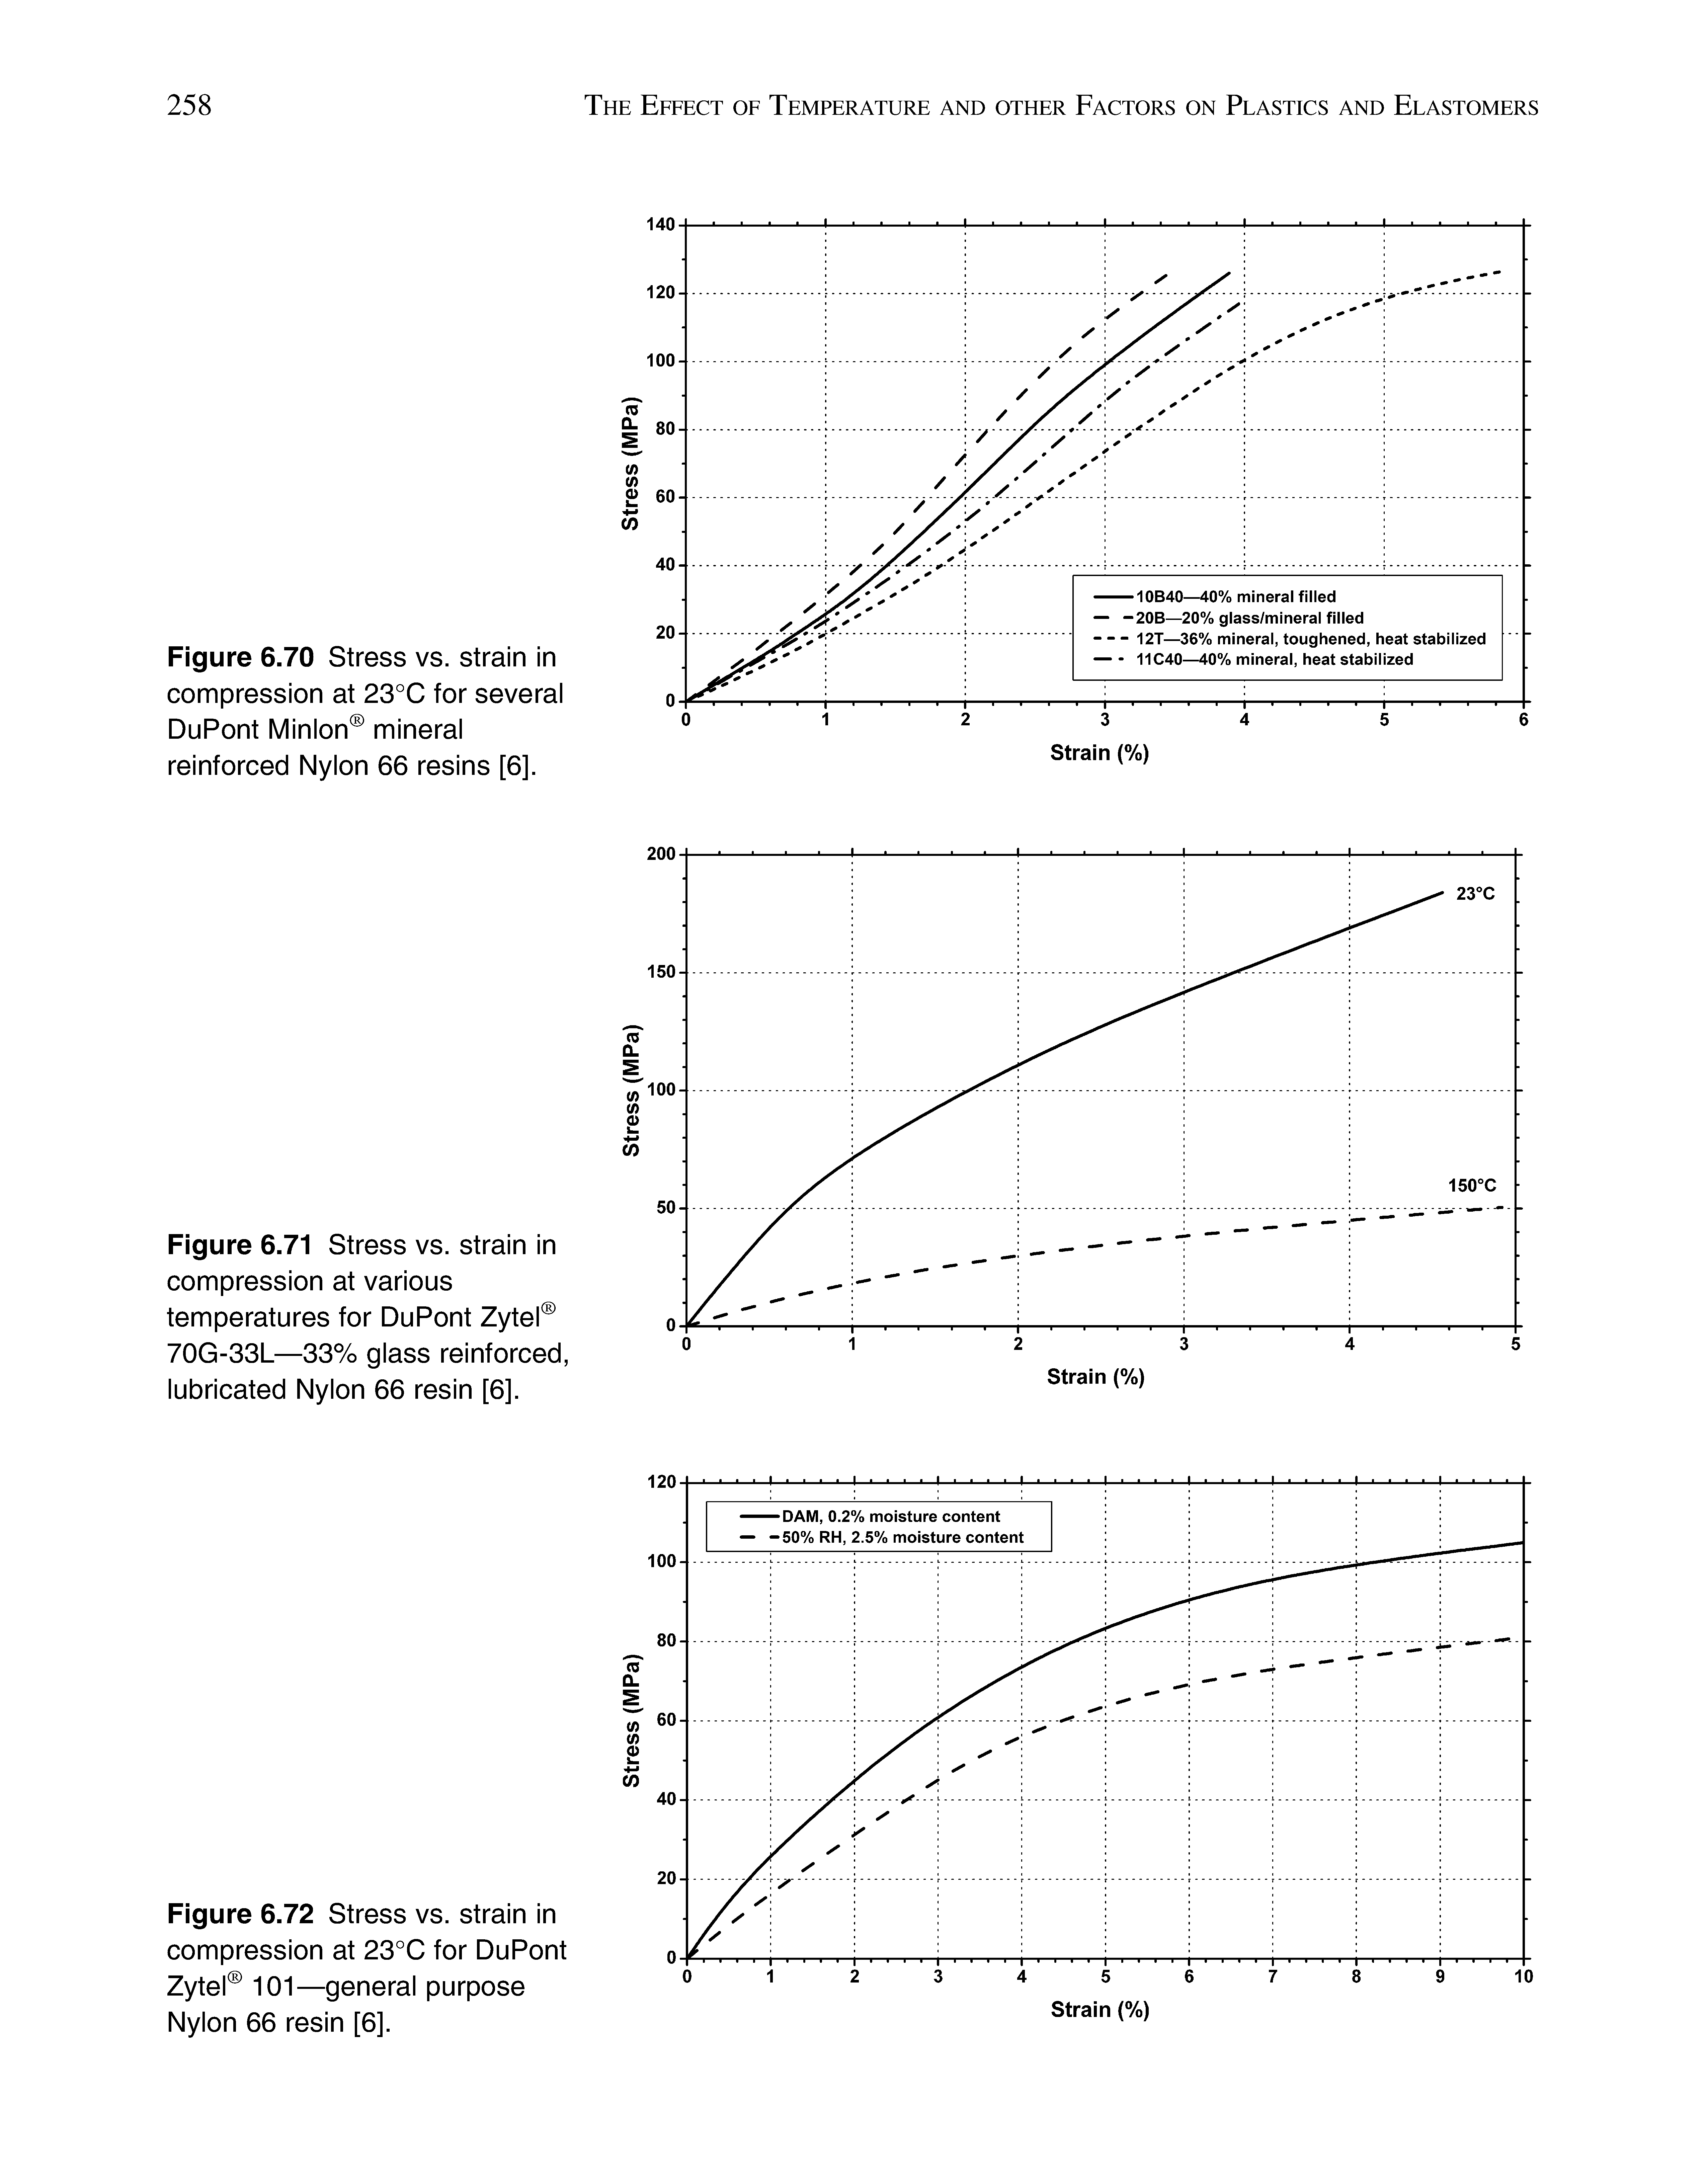 Figure 6.71 Stress vs. strain in compression at various temperatures for DuPont Zytel 70G-33L—33% glass reinforced, lubricated Nylon 66 resin [6].